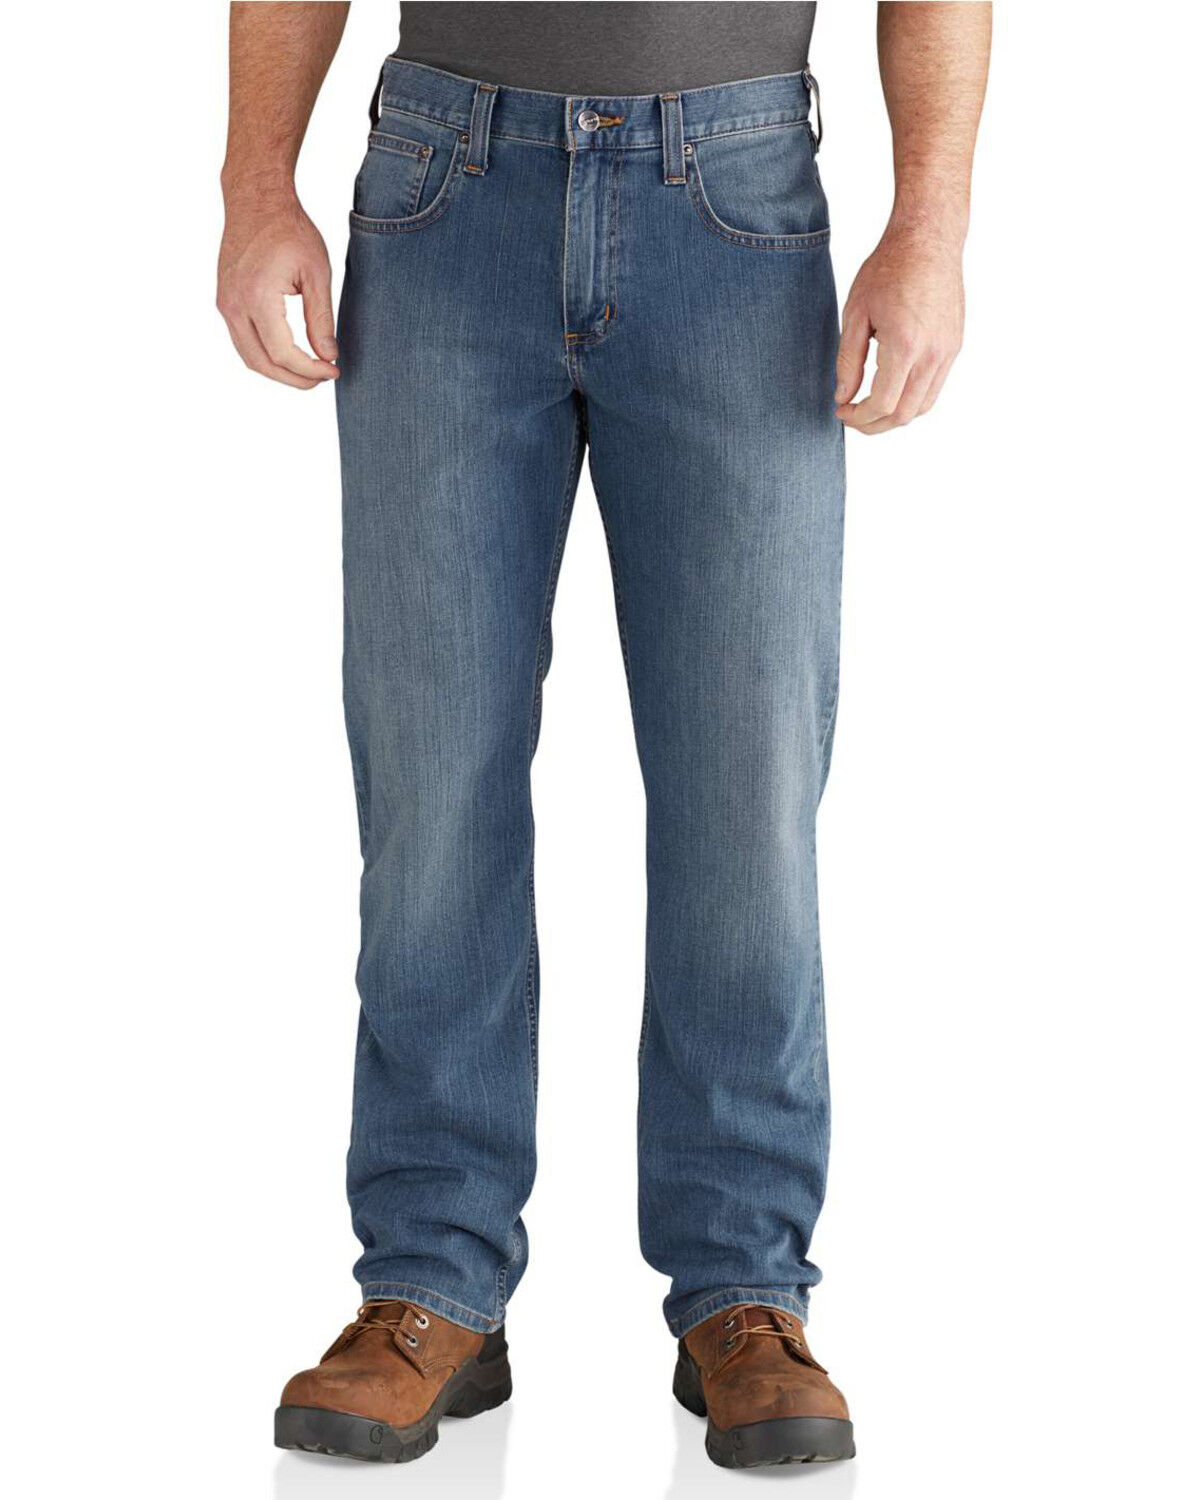 rugged jeans